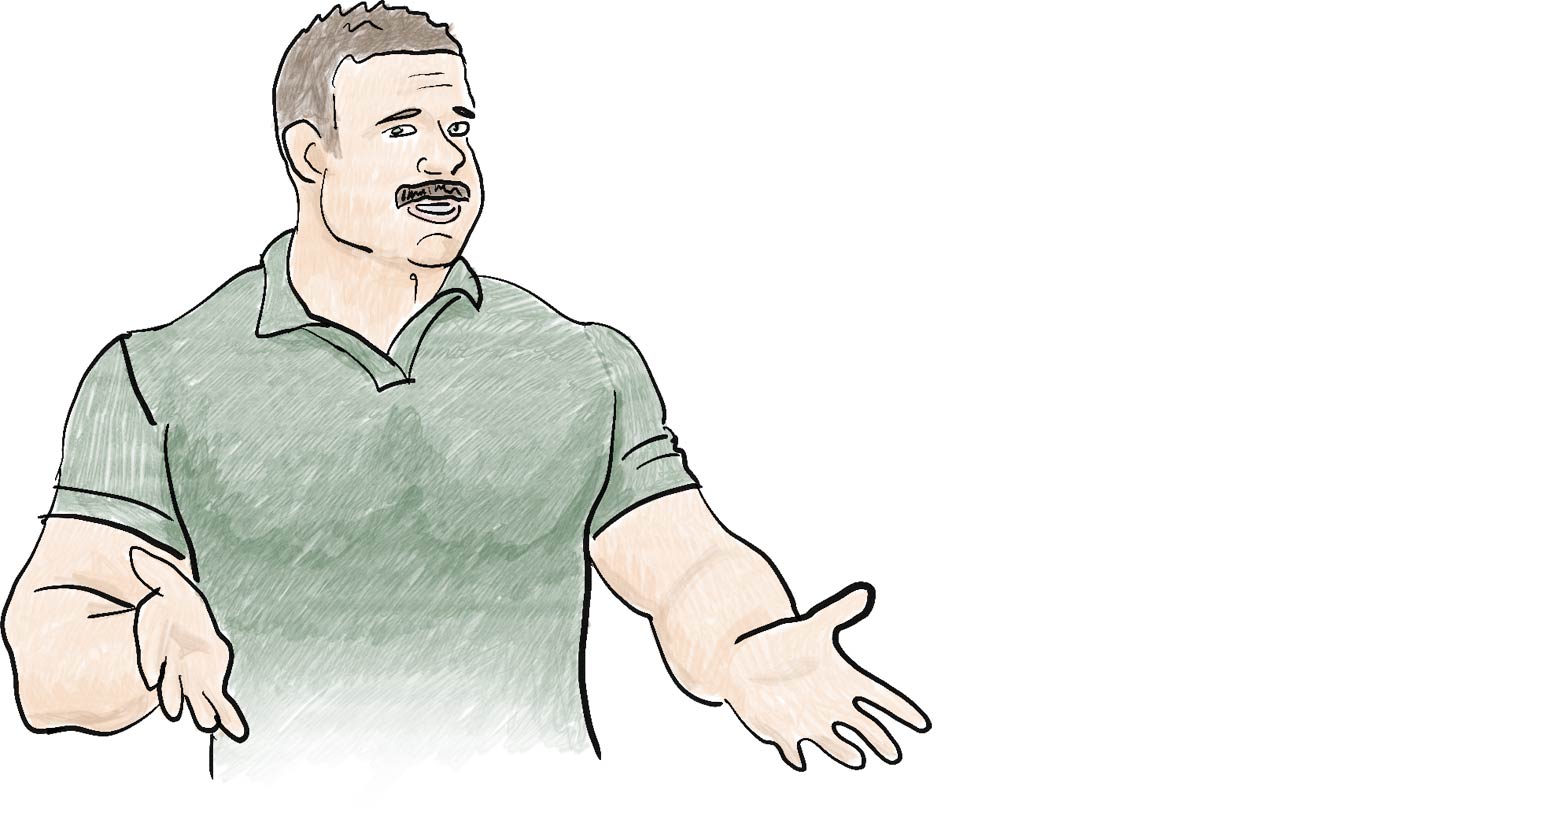 Illustration of Chris talking and gesturing with his hands, true to his Sicilian heritage